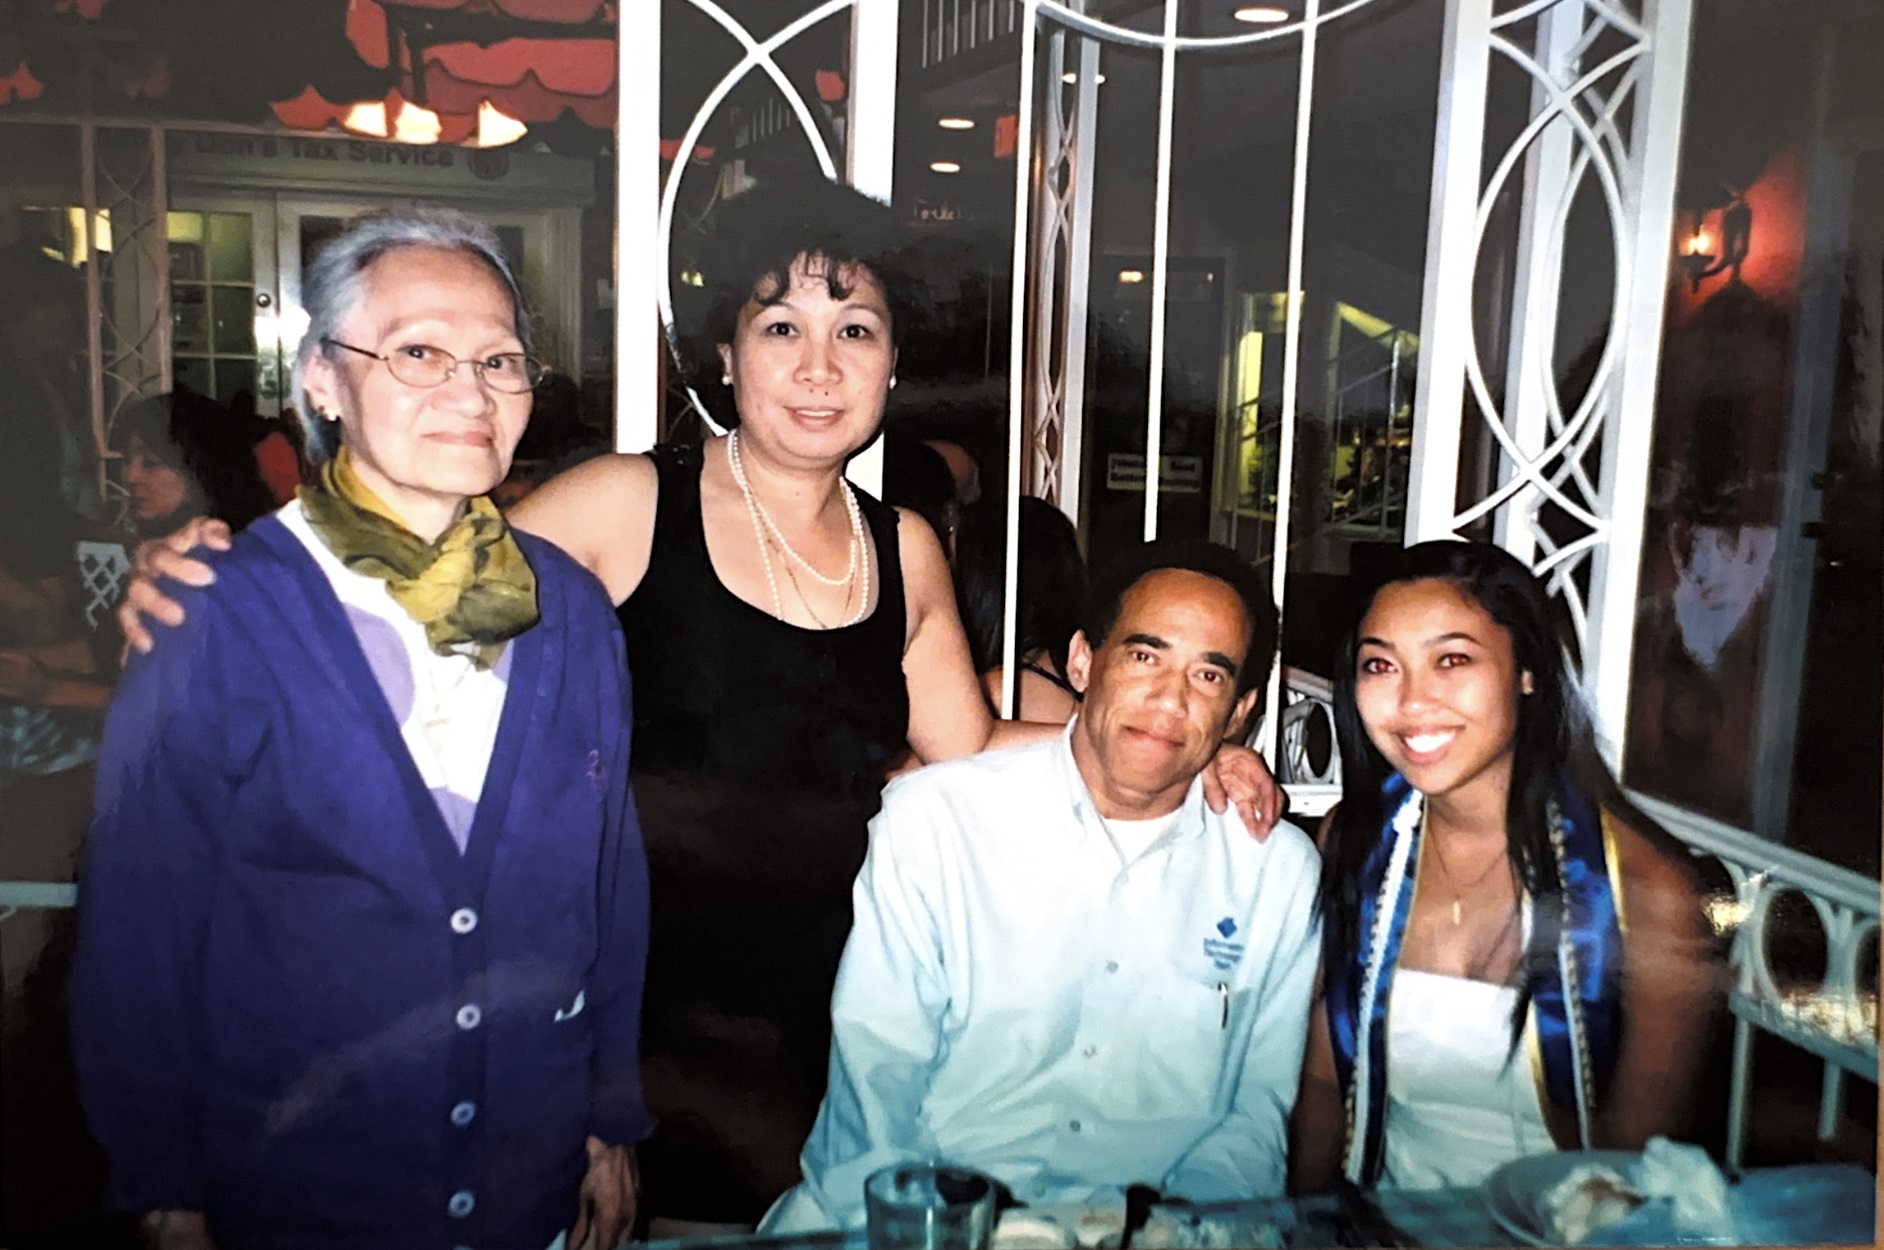 A family is pictured sitting inside a restaurant setting. A grandmother, two parental figures, and their young daughter all smile for the camera. The daughter wears a royal blue college graduation sash around her shoulders.